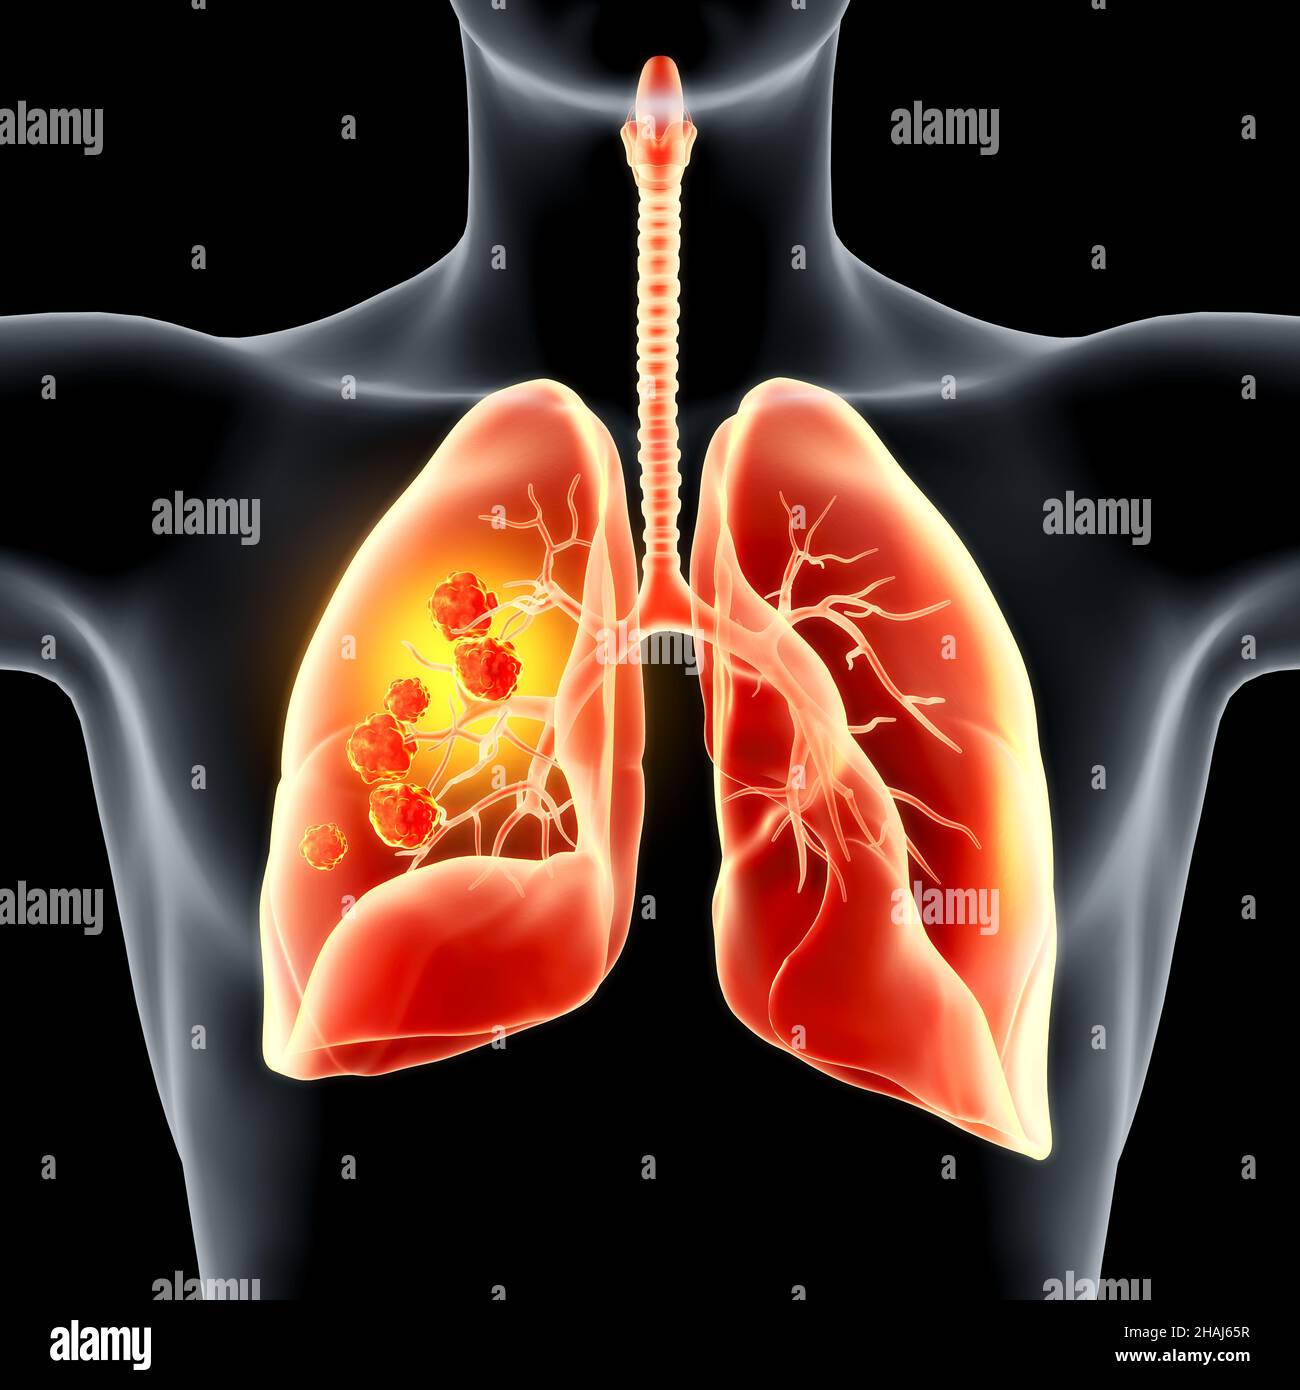 Highlighted carcinoma in right lung, 3D illustration Stock Photo